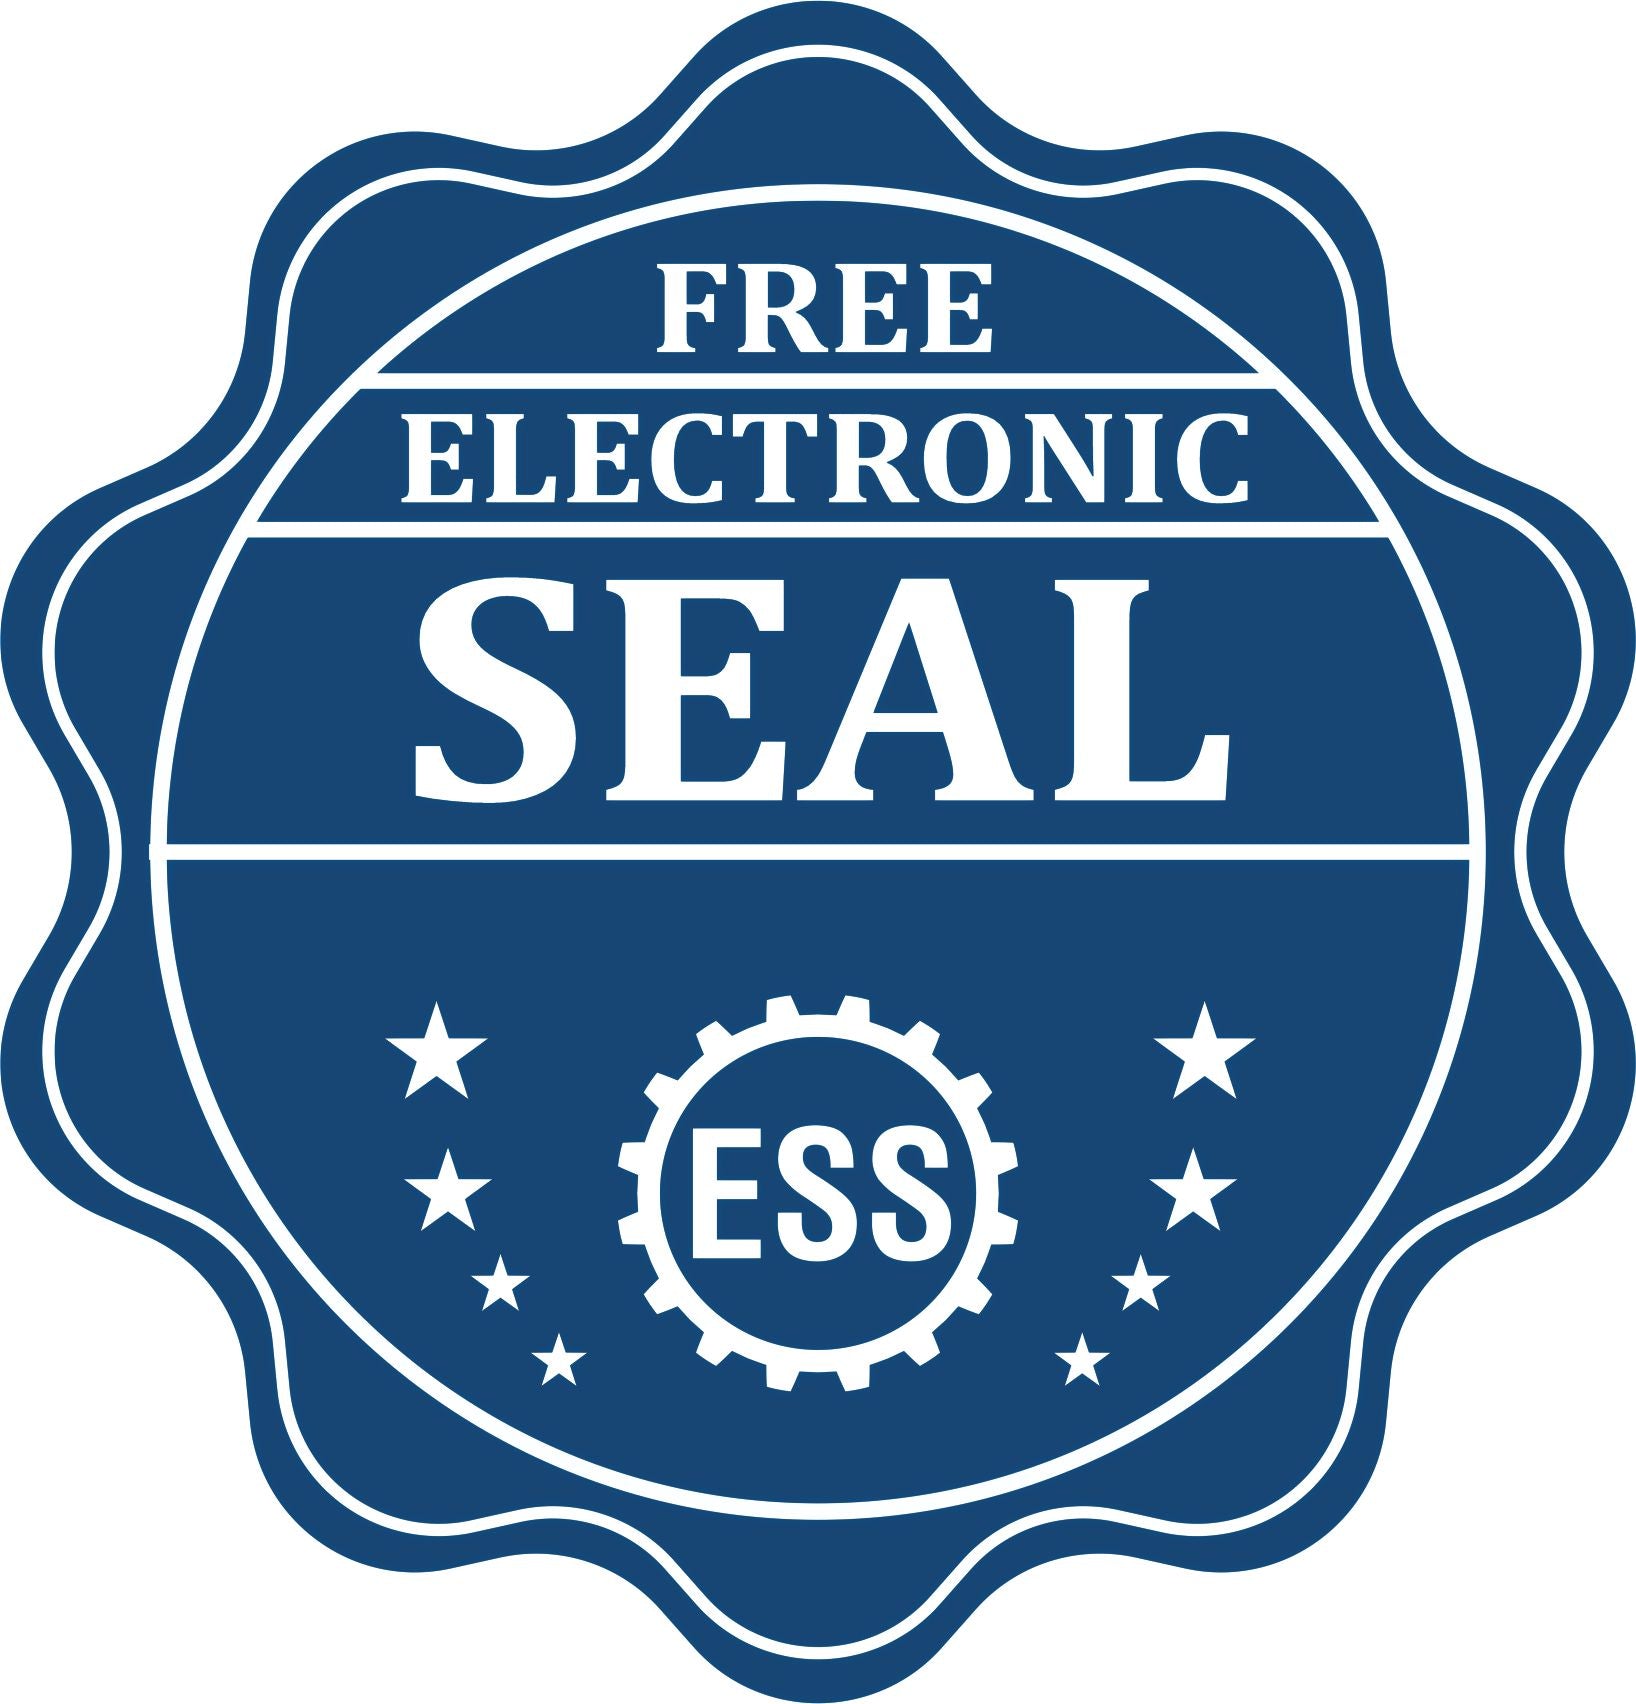 A badge showing a free electronic seal for the Virginia Desk Surveyor Seal Embosser with stars and the ESS gear on the emblem.